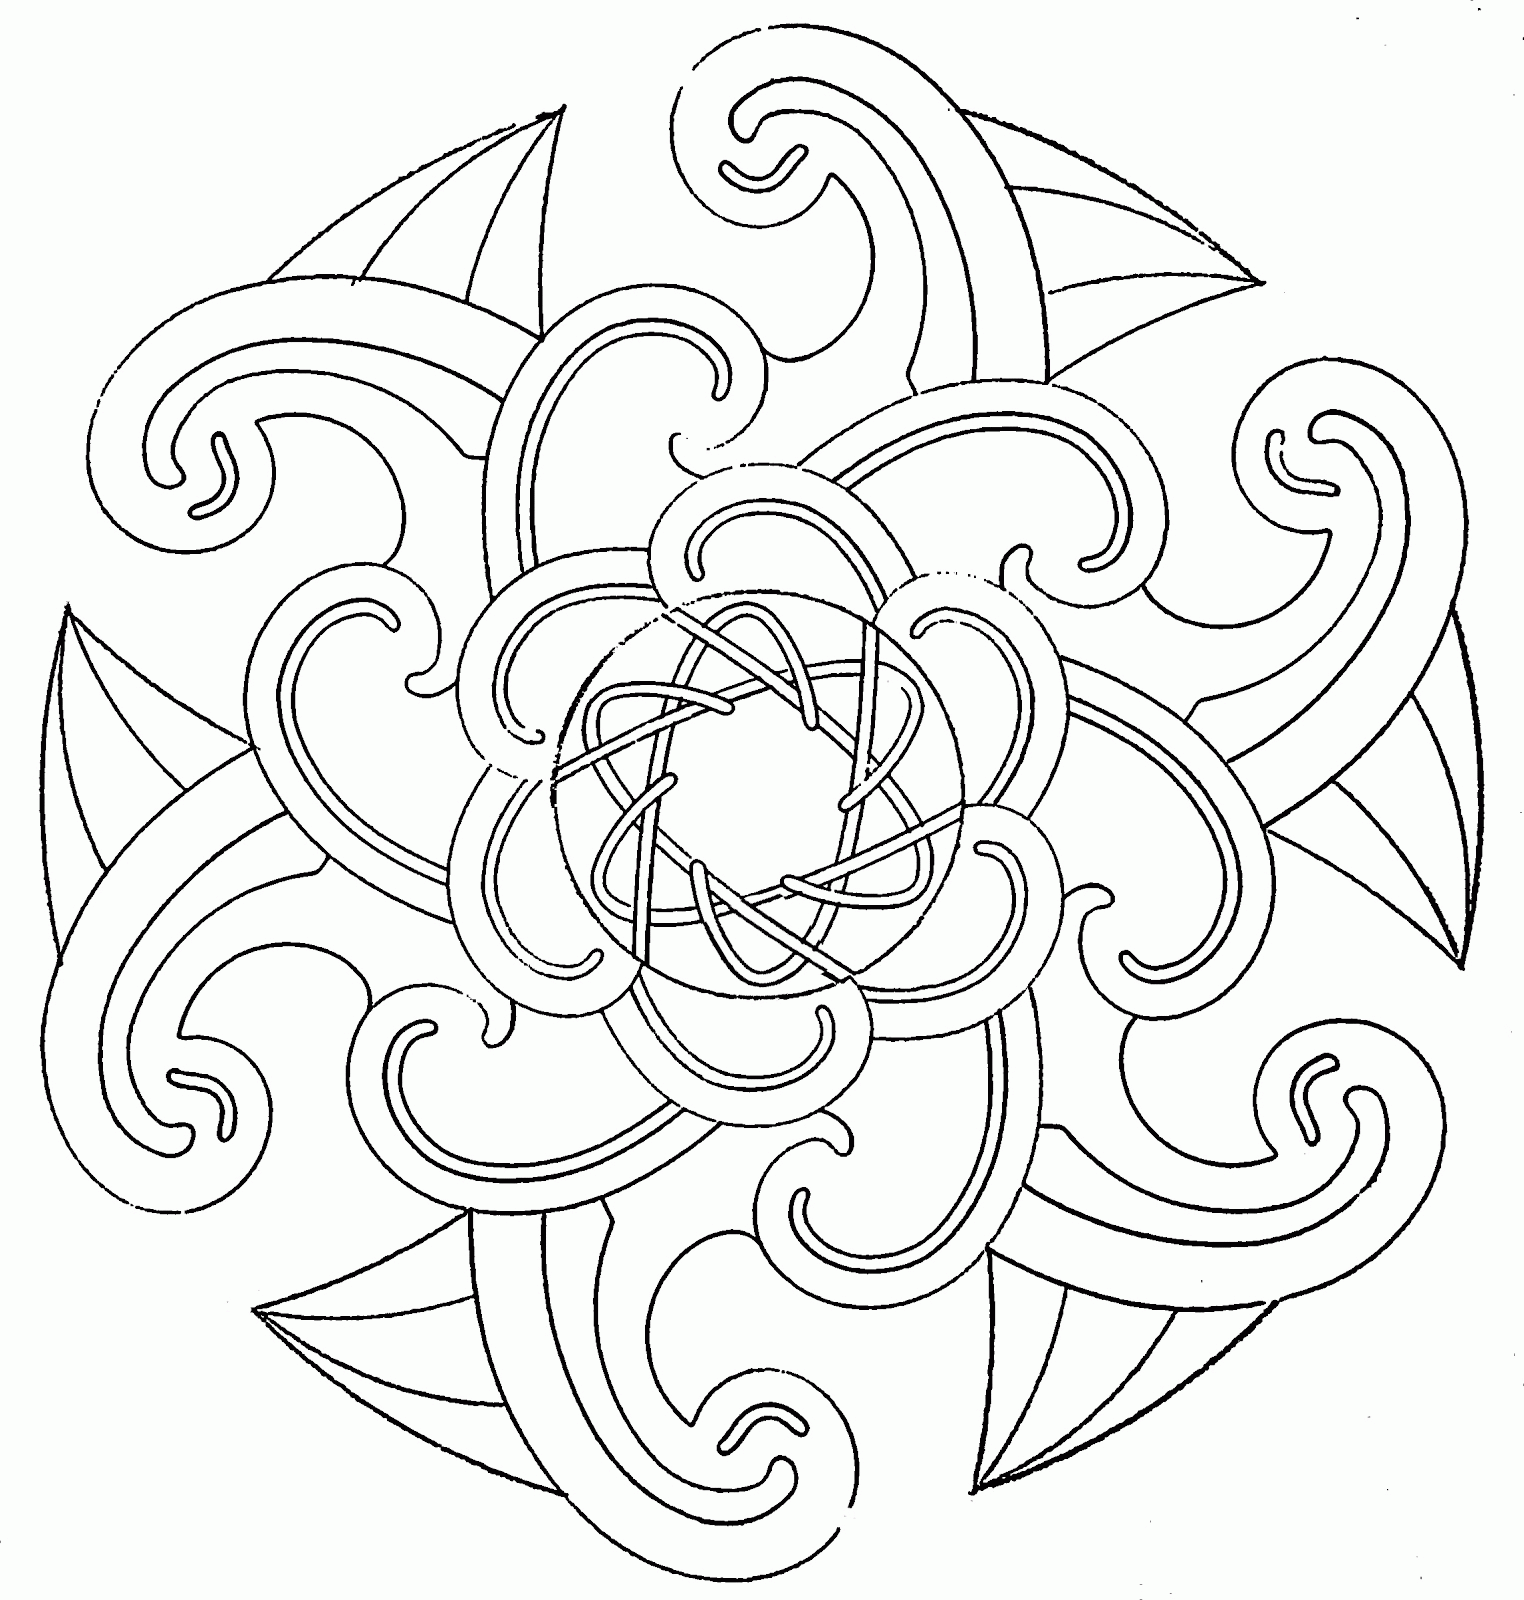 Cool Coloring Designs | Coloring Pages for Kids and for Adults